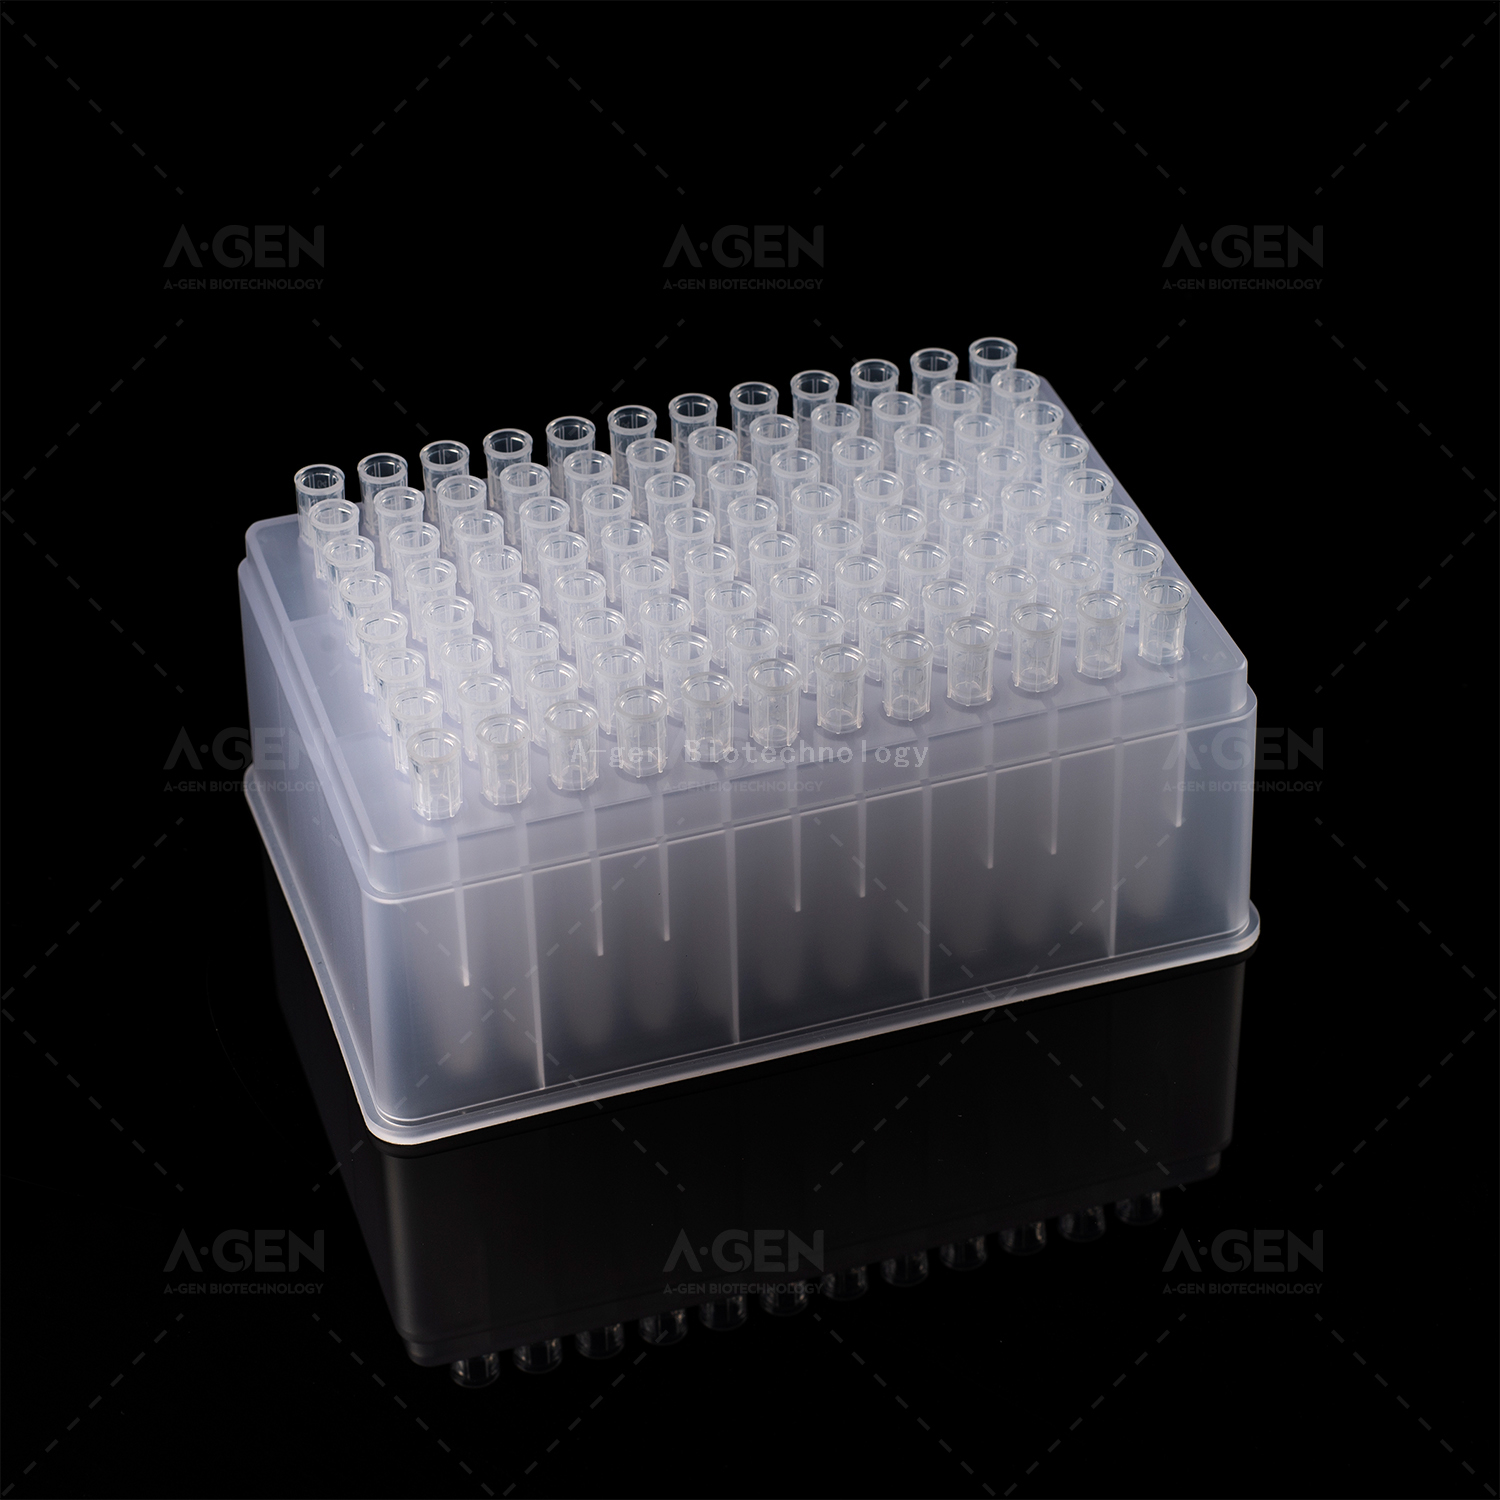 BECKMAN 50μL Clear Robotic PP Pipette Tip (Racked,sterilized) for DNA/RNA Extraction No Filter FX-50-RS